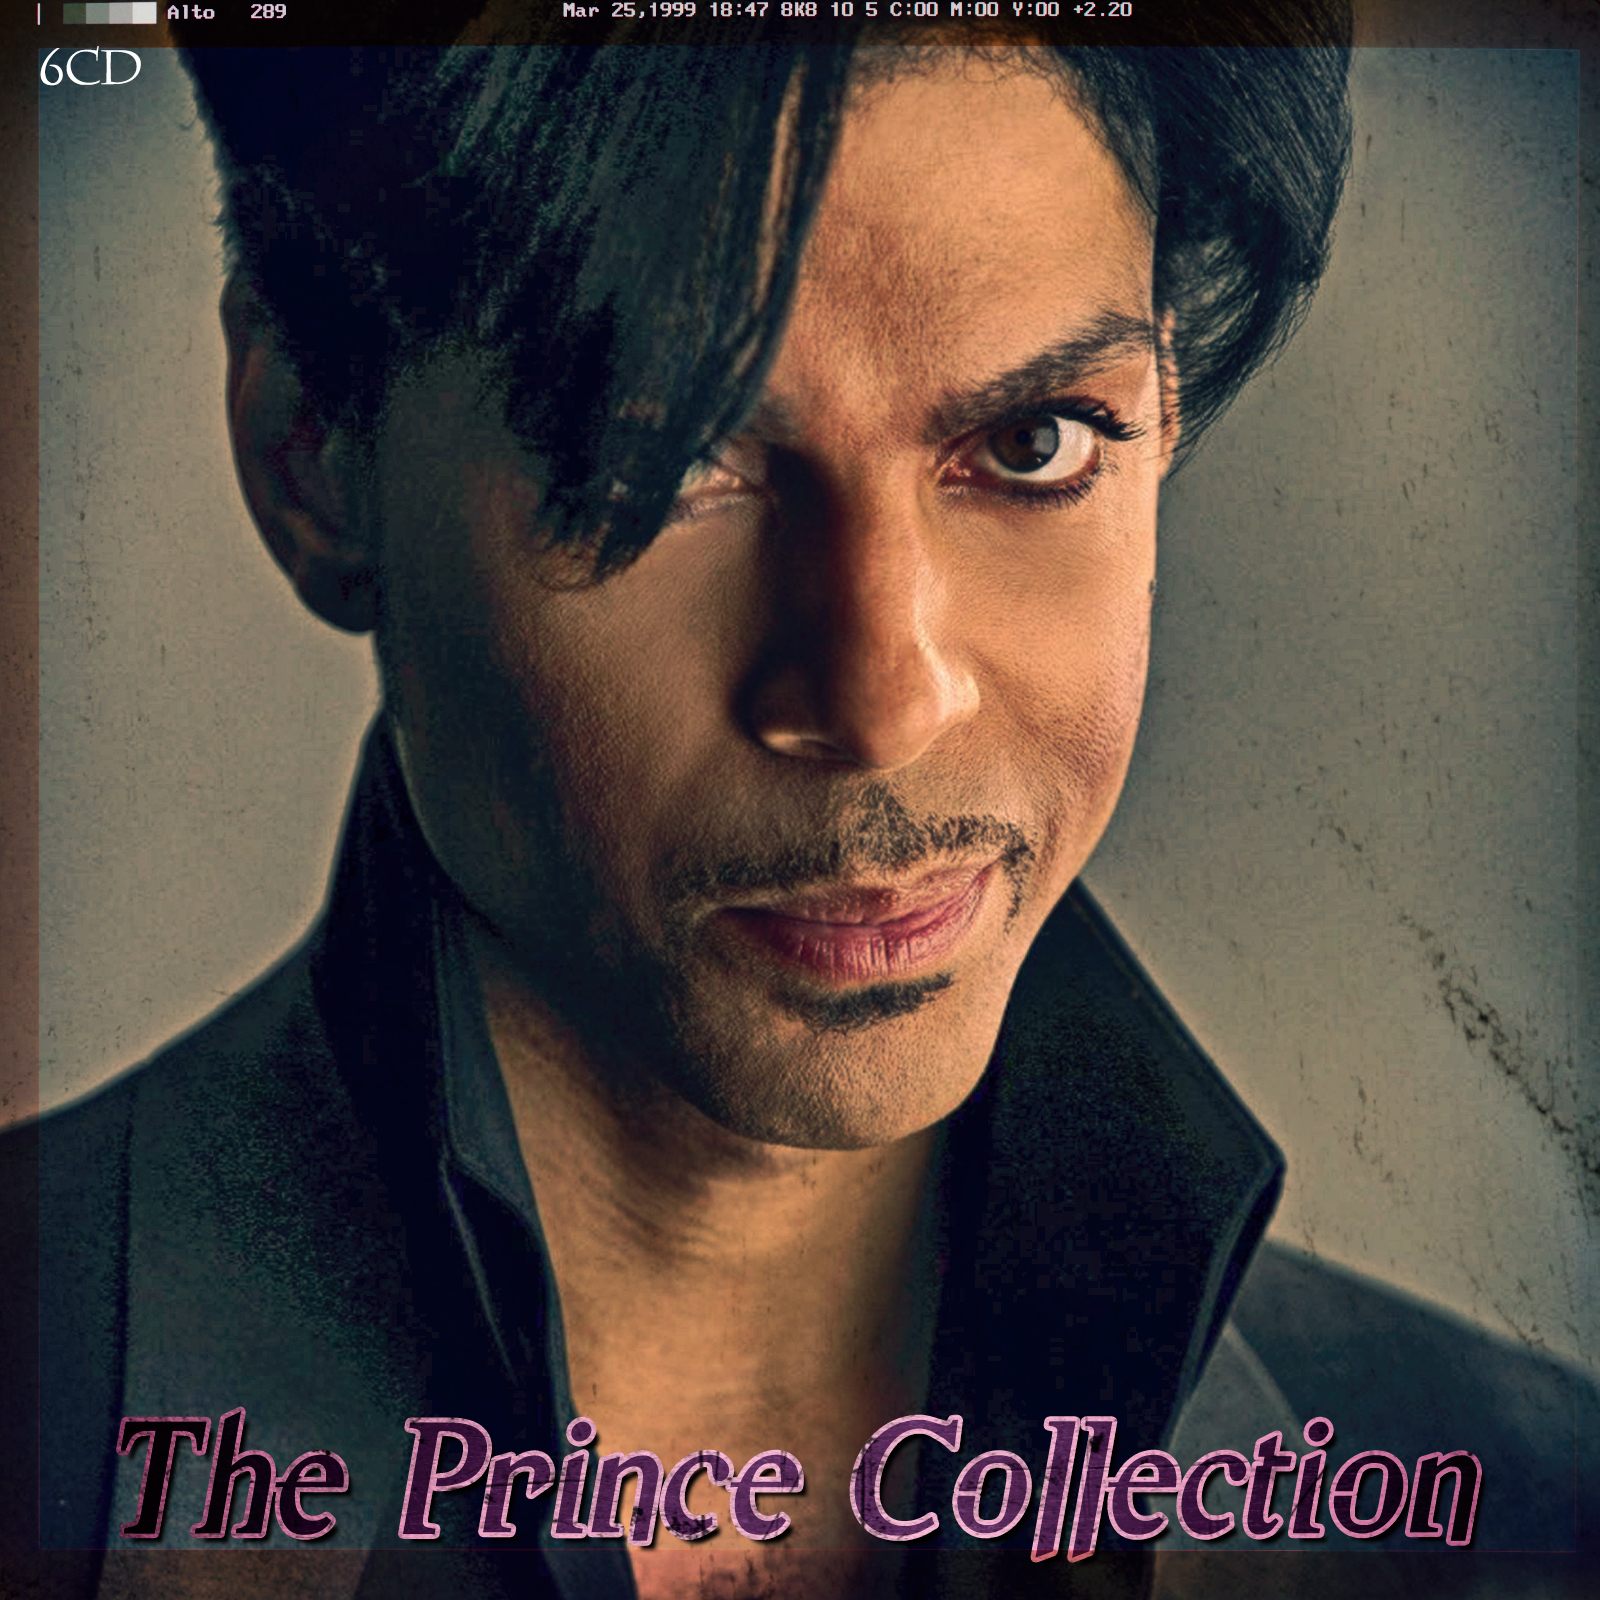 The Prince Collection (6CD)